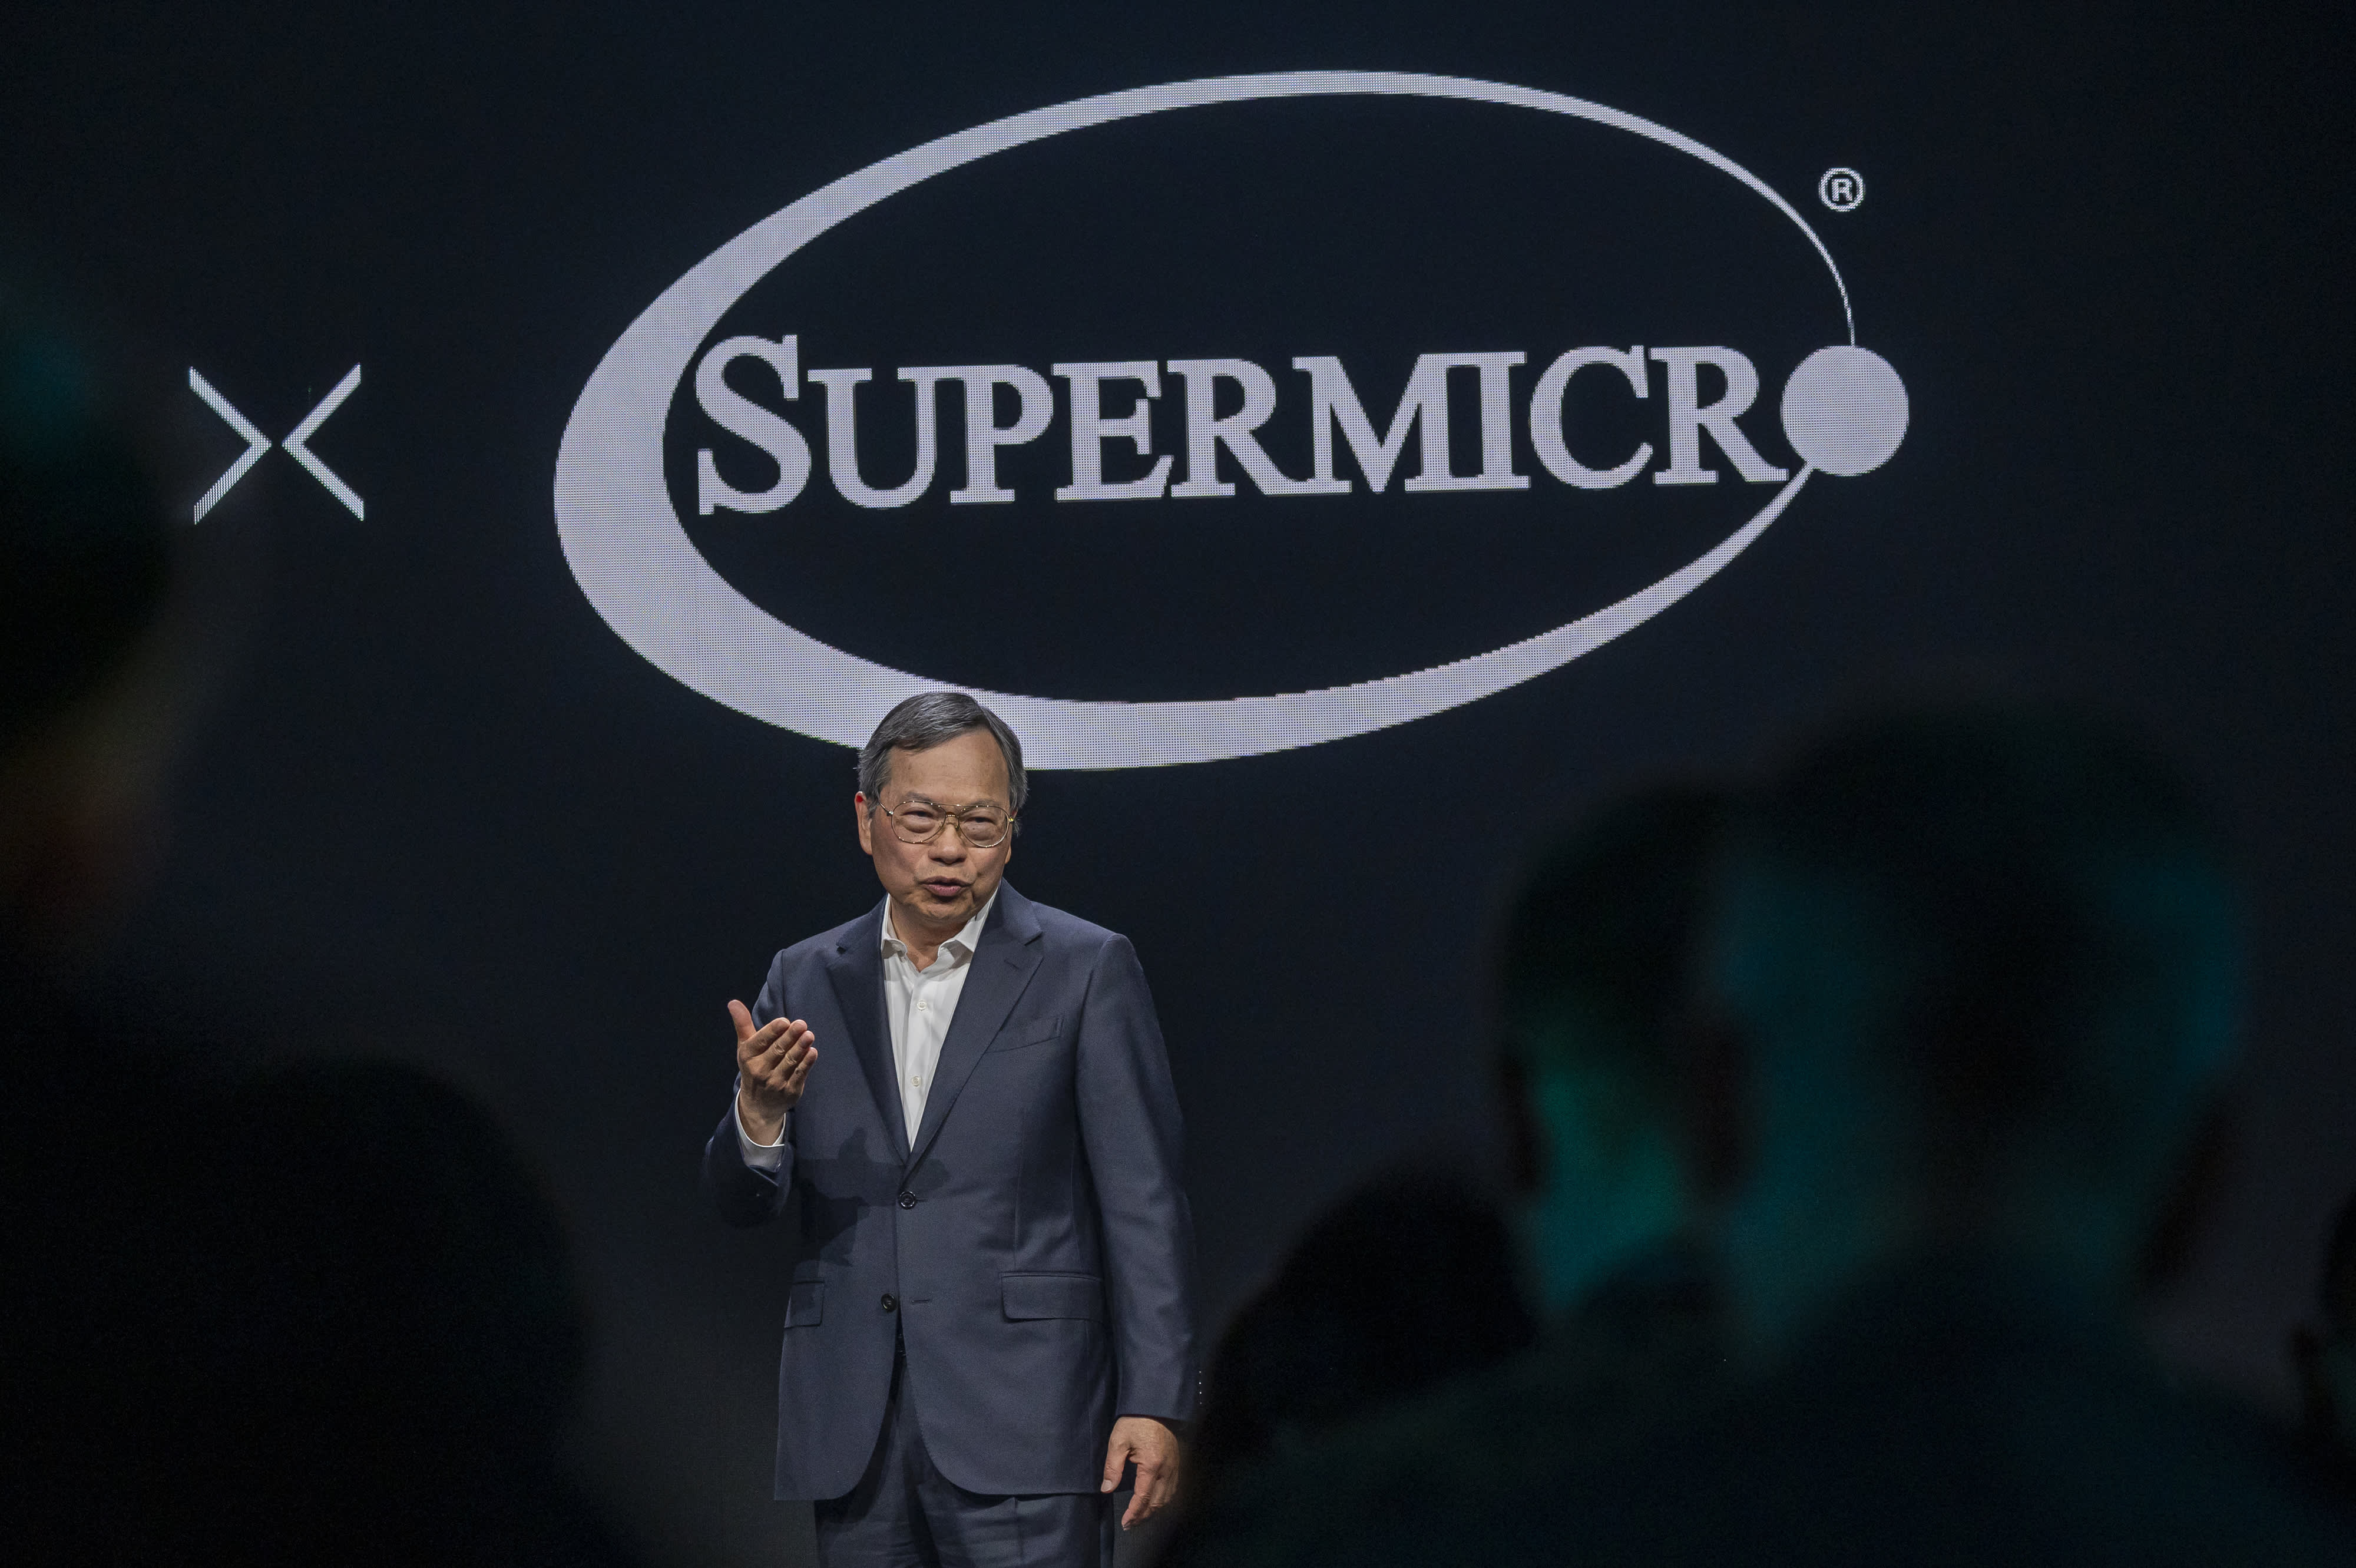 Super Micro joined the S&P 500 after a 20-fold jump in shares in two years